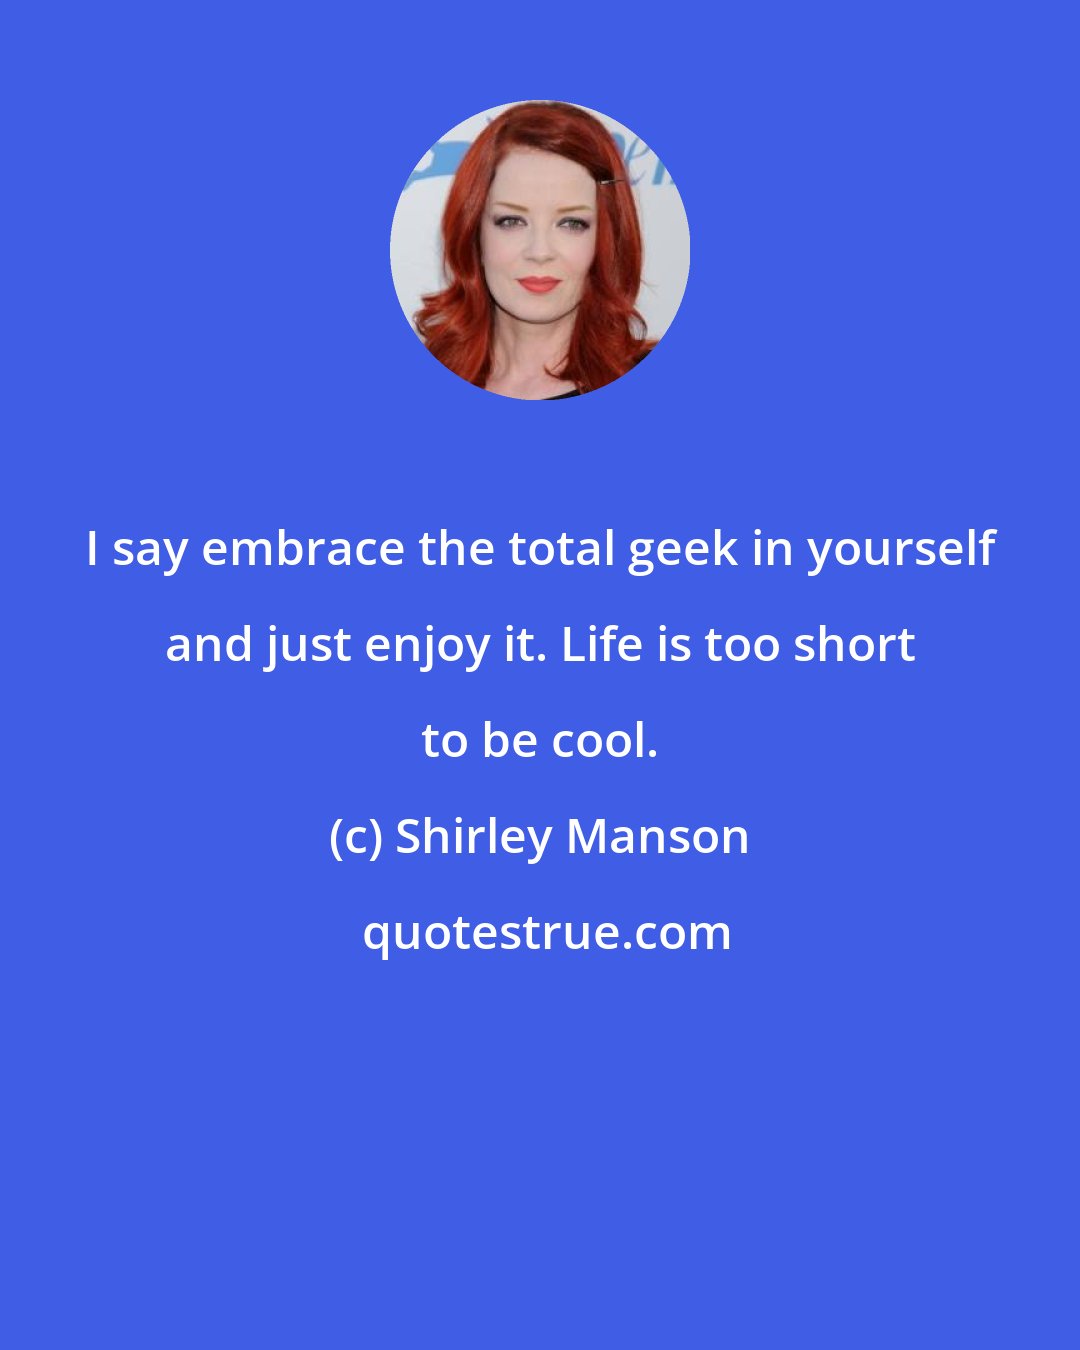 Shirley Manson: I say embrace the total geek in yourself and just enjoy it. Life is too short to be cool.